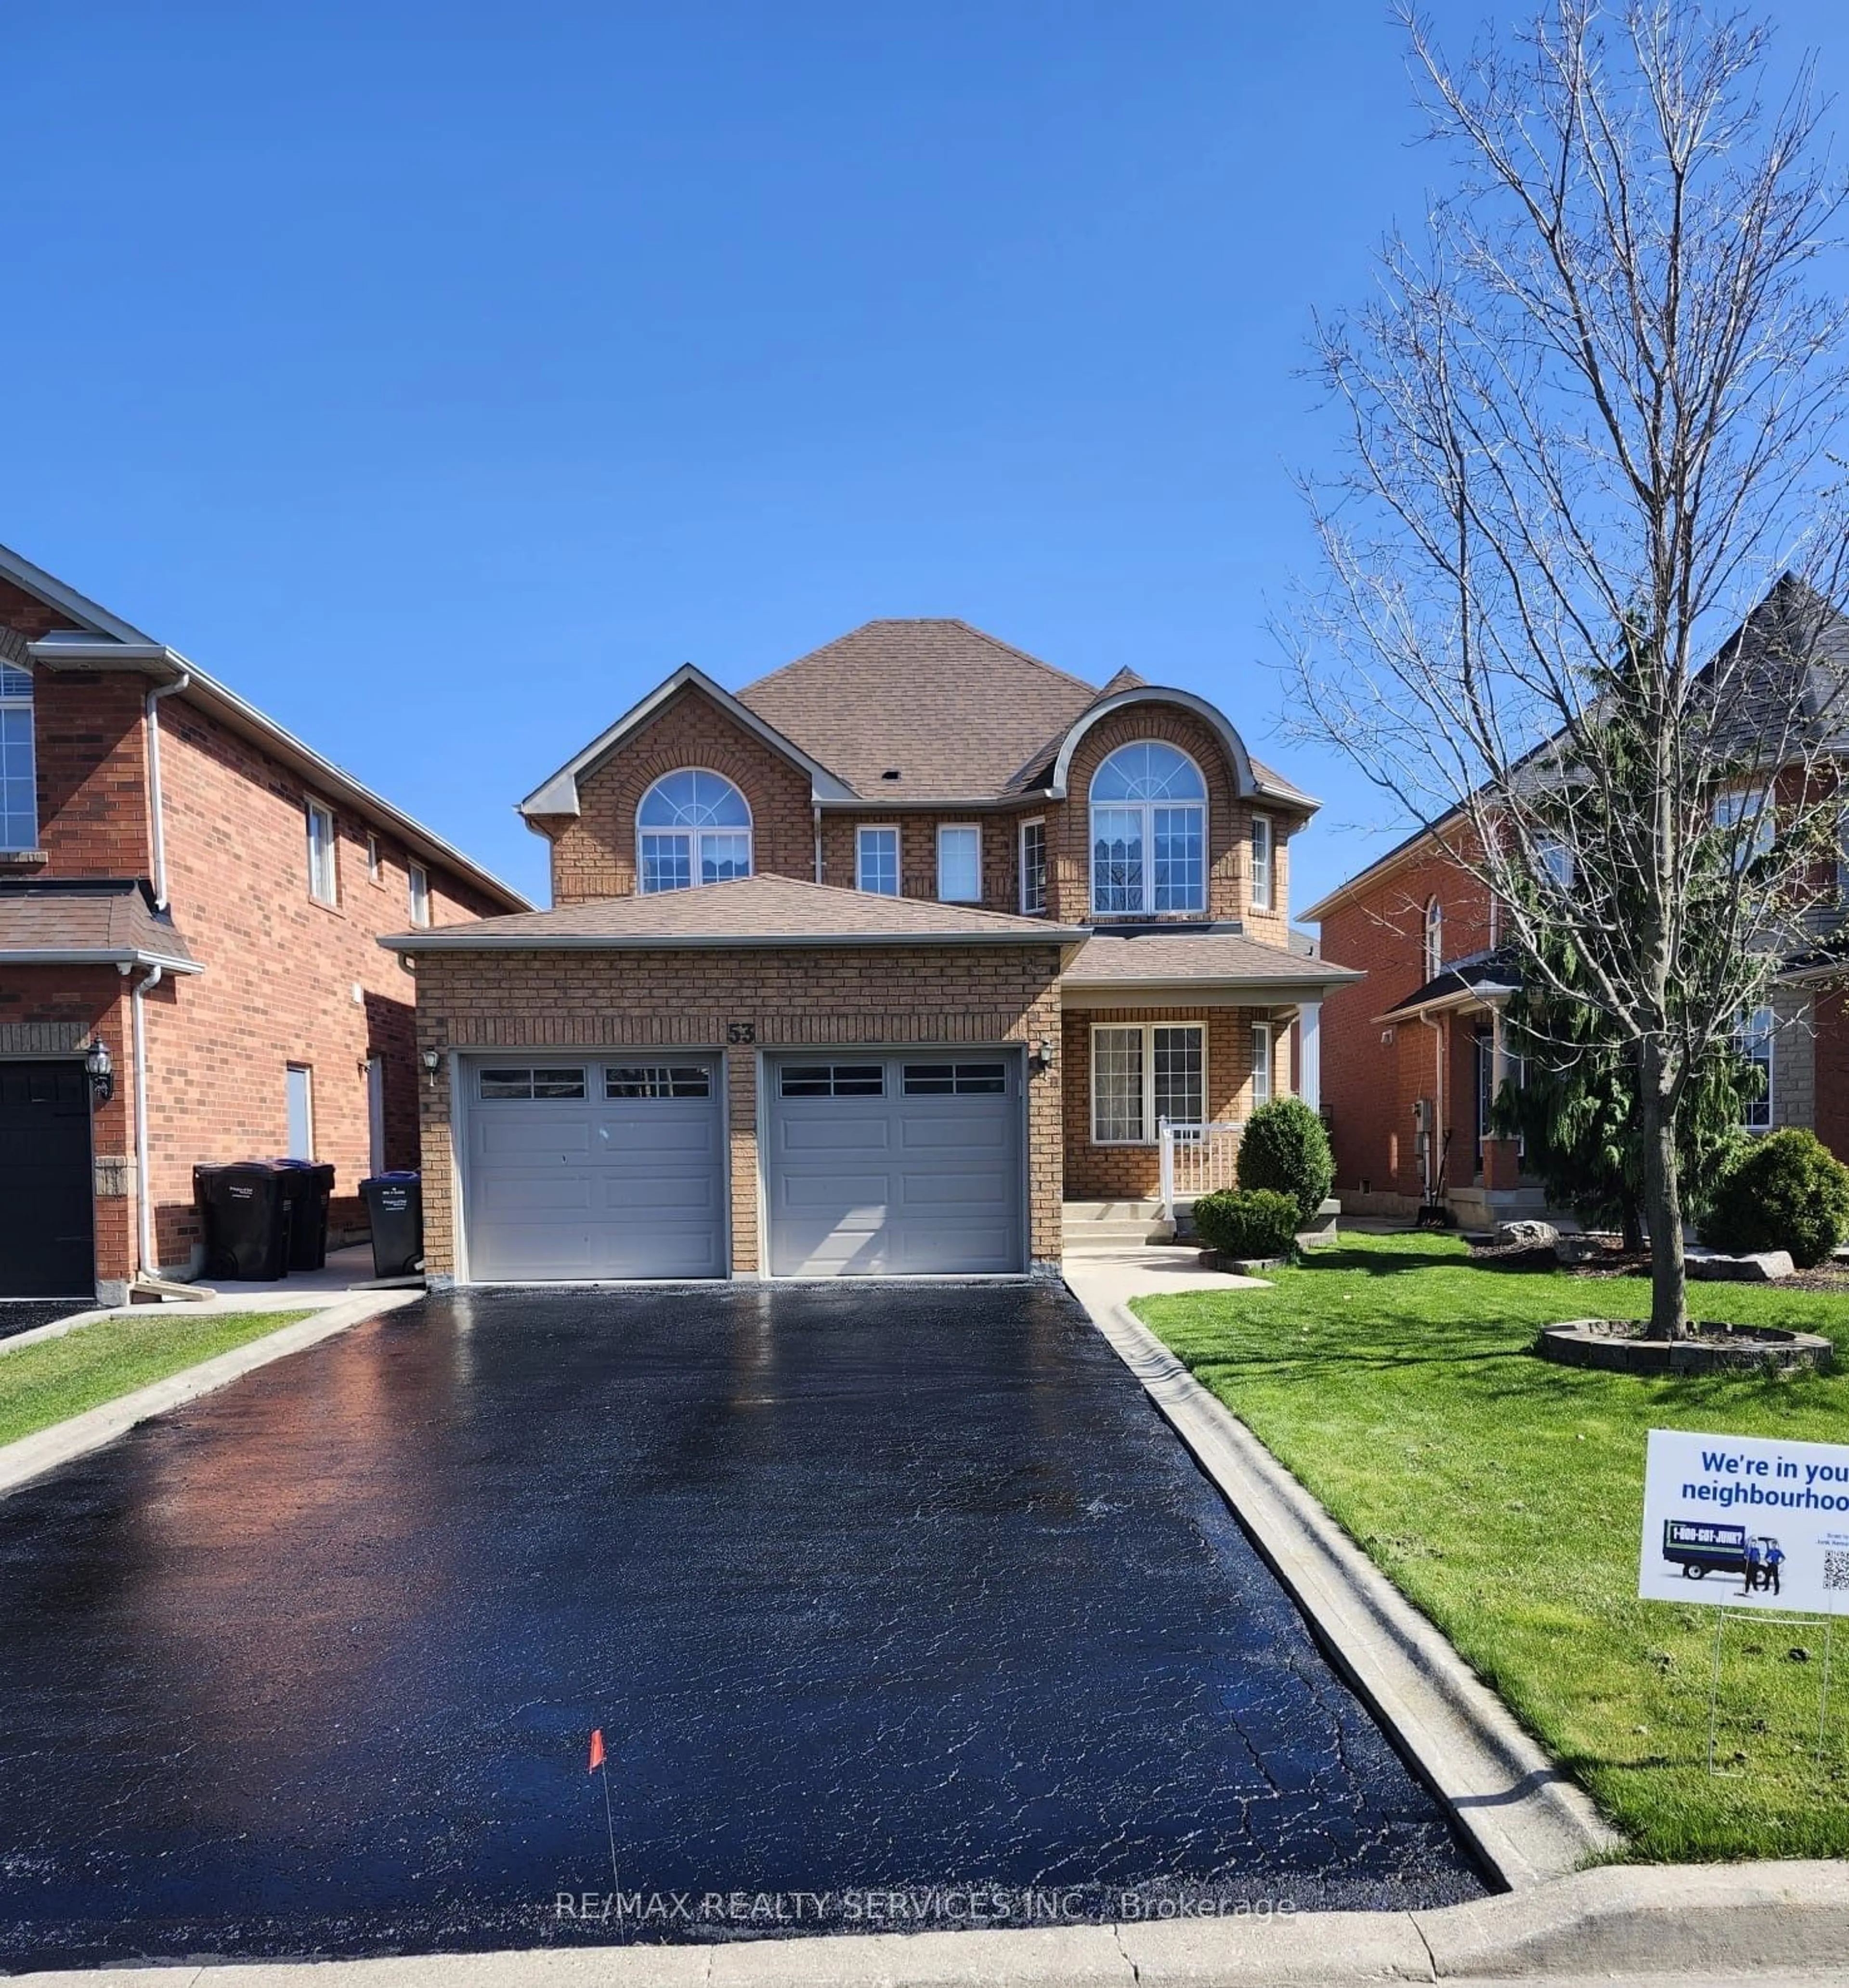 Home with brick exterior material for 53 Baccarat Cres, Brampton Ontario L7A 1K8